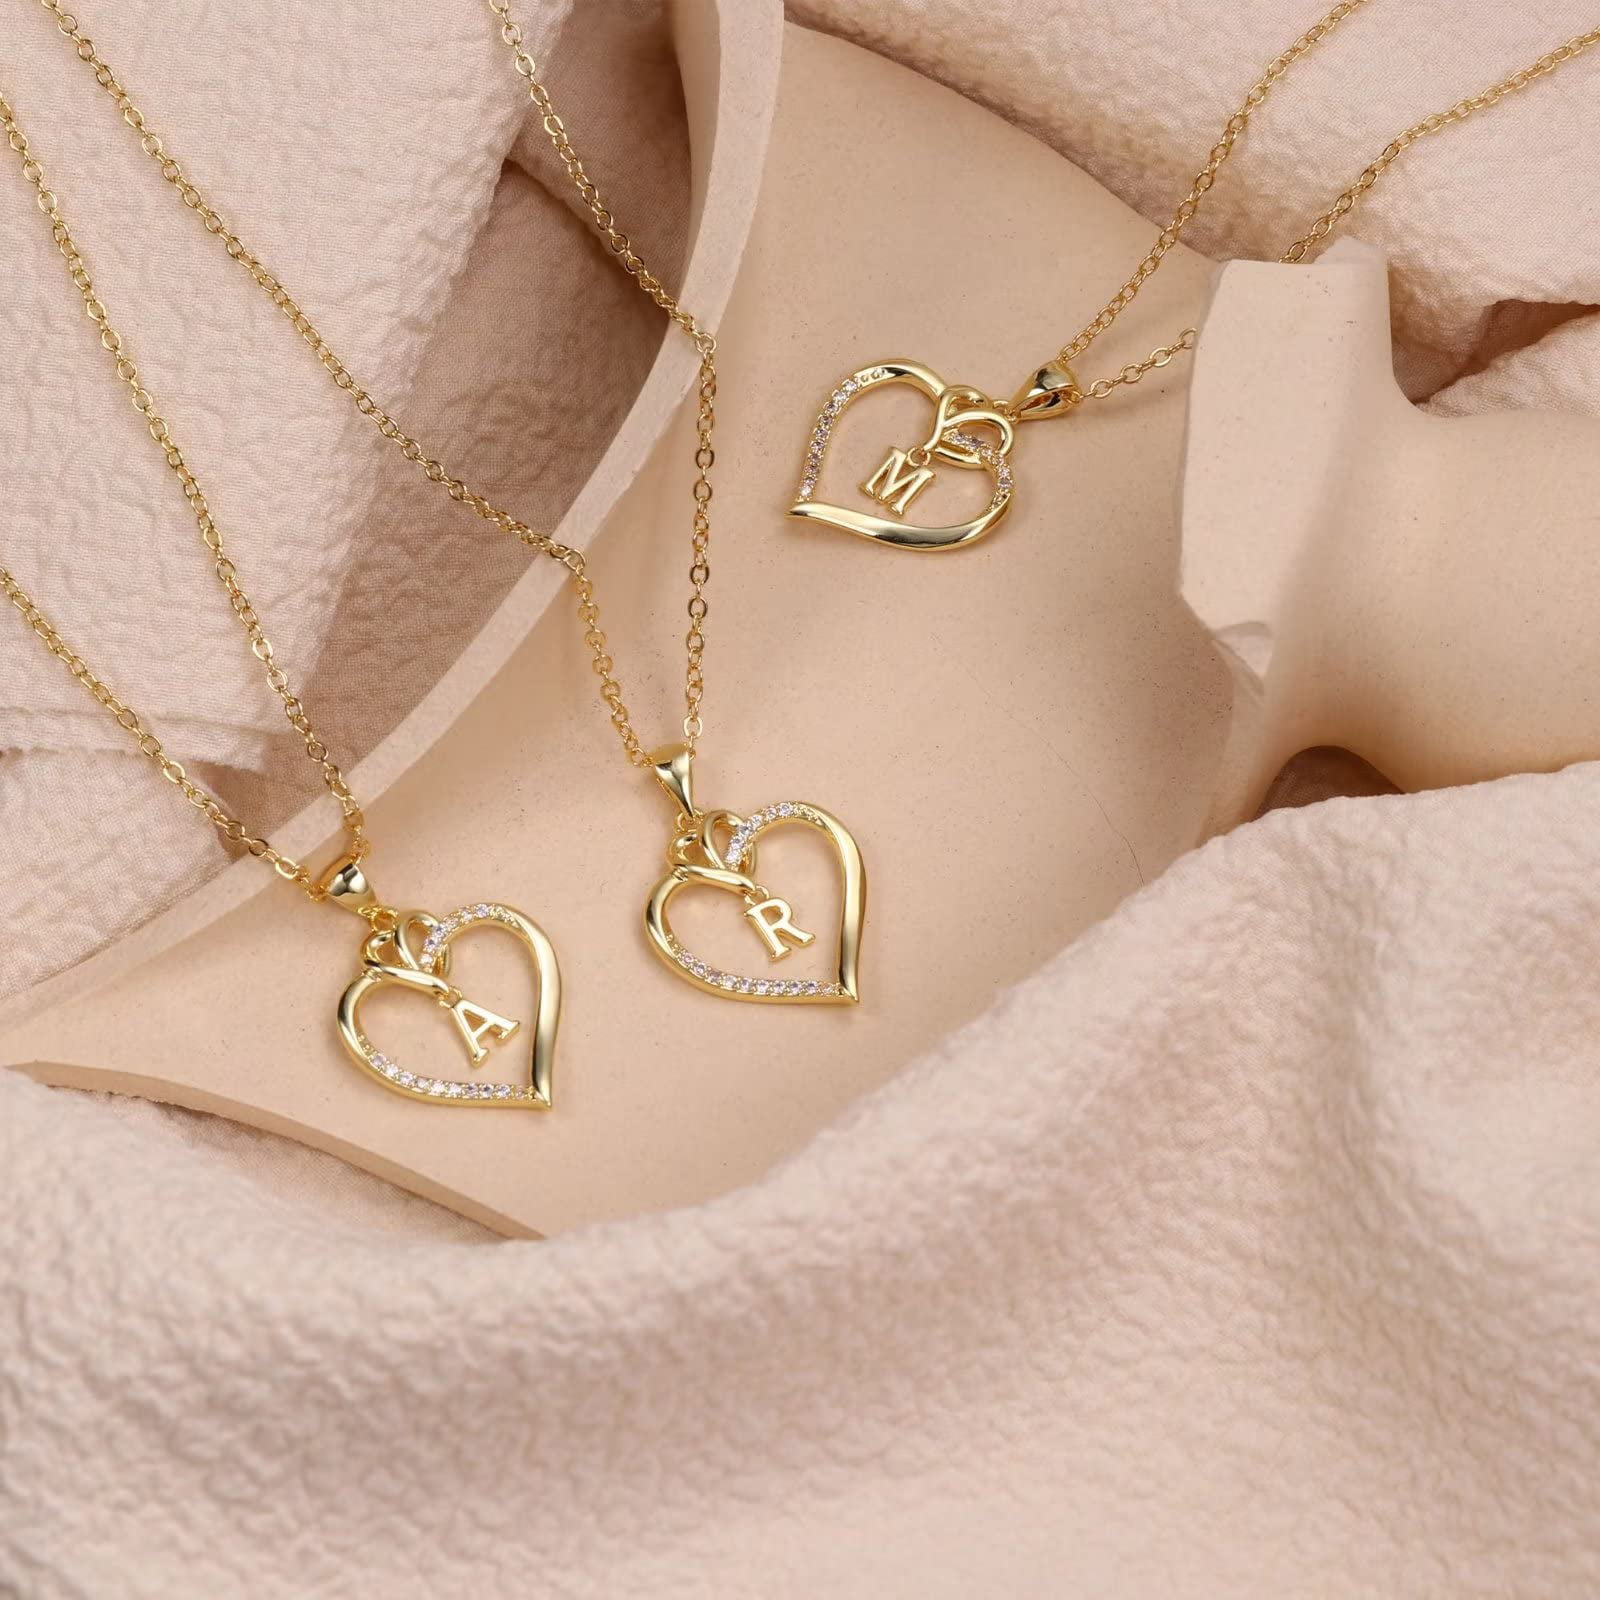 Buy Delicate Heart Initial Necklace for USD 98.00 | James Avery | Joyeria